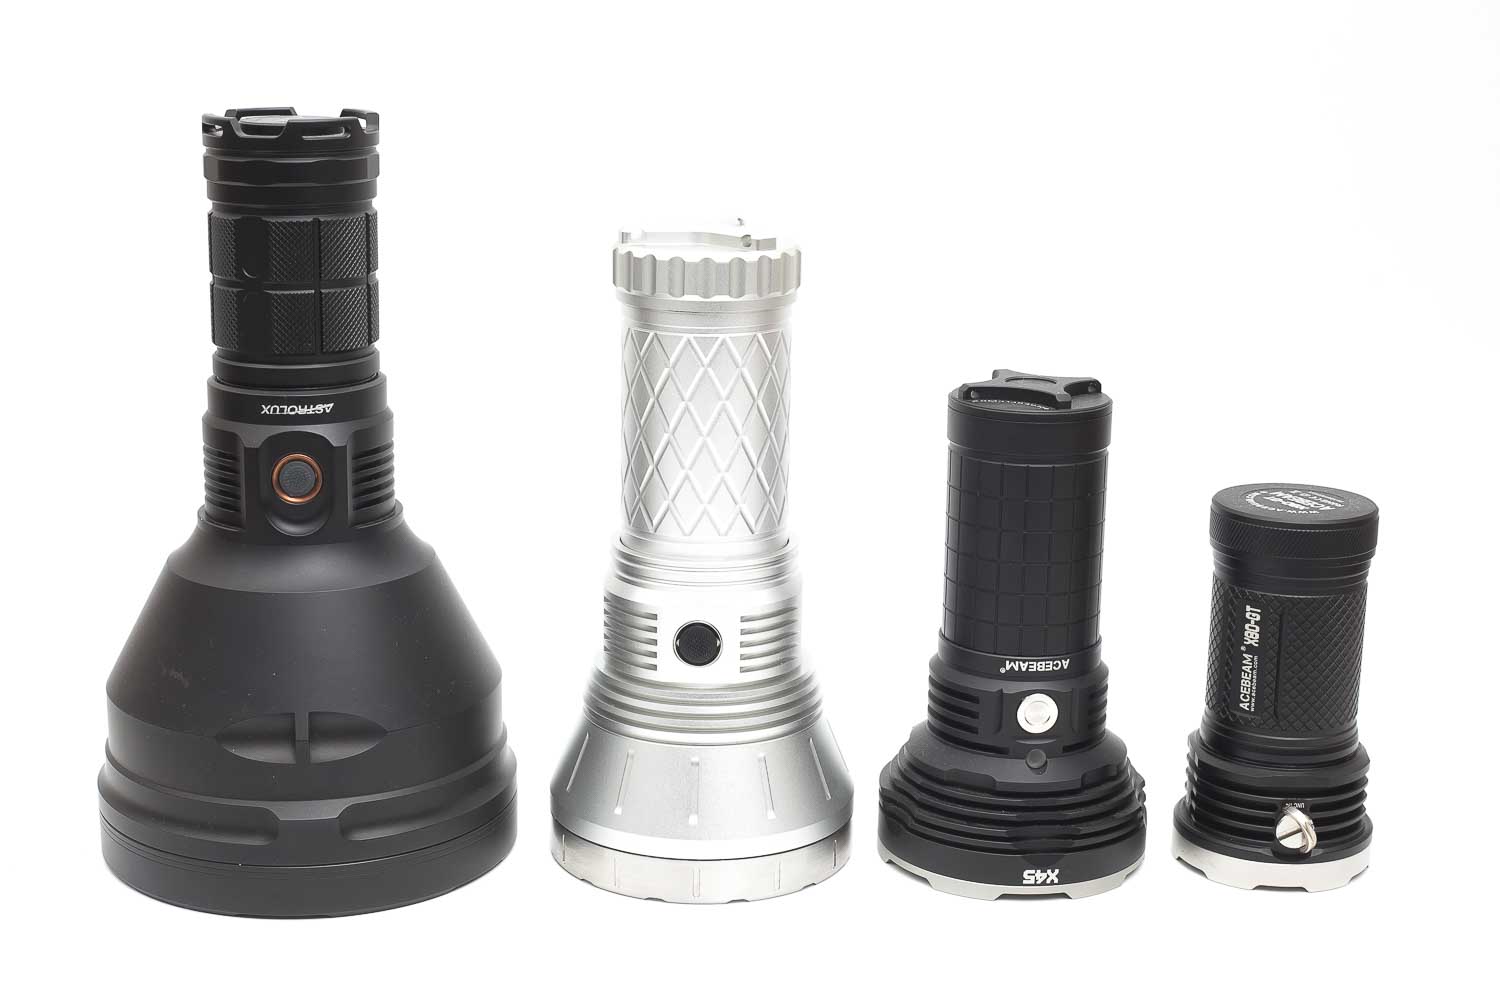 Haikelite HK90 size compared to other high power flashlights